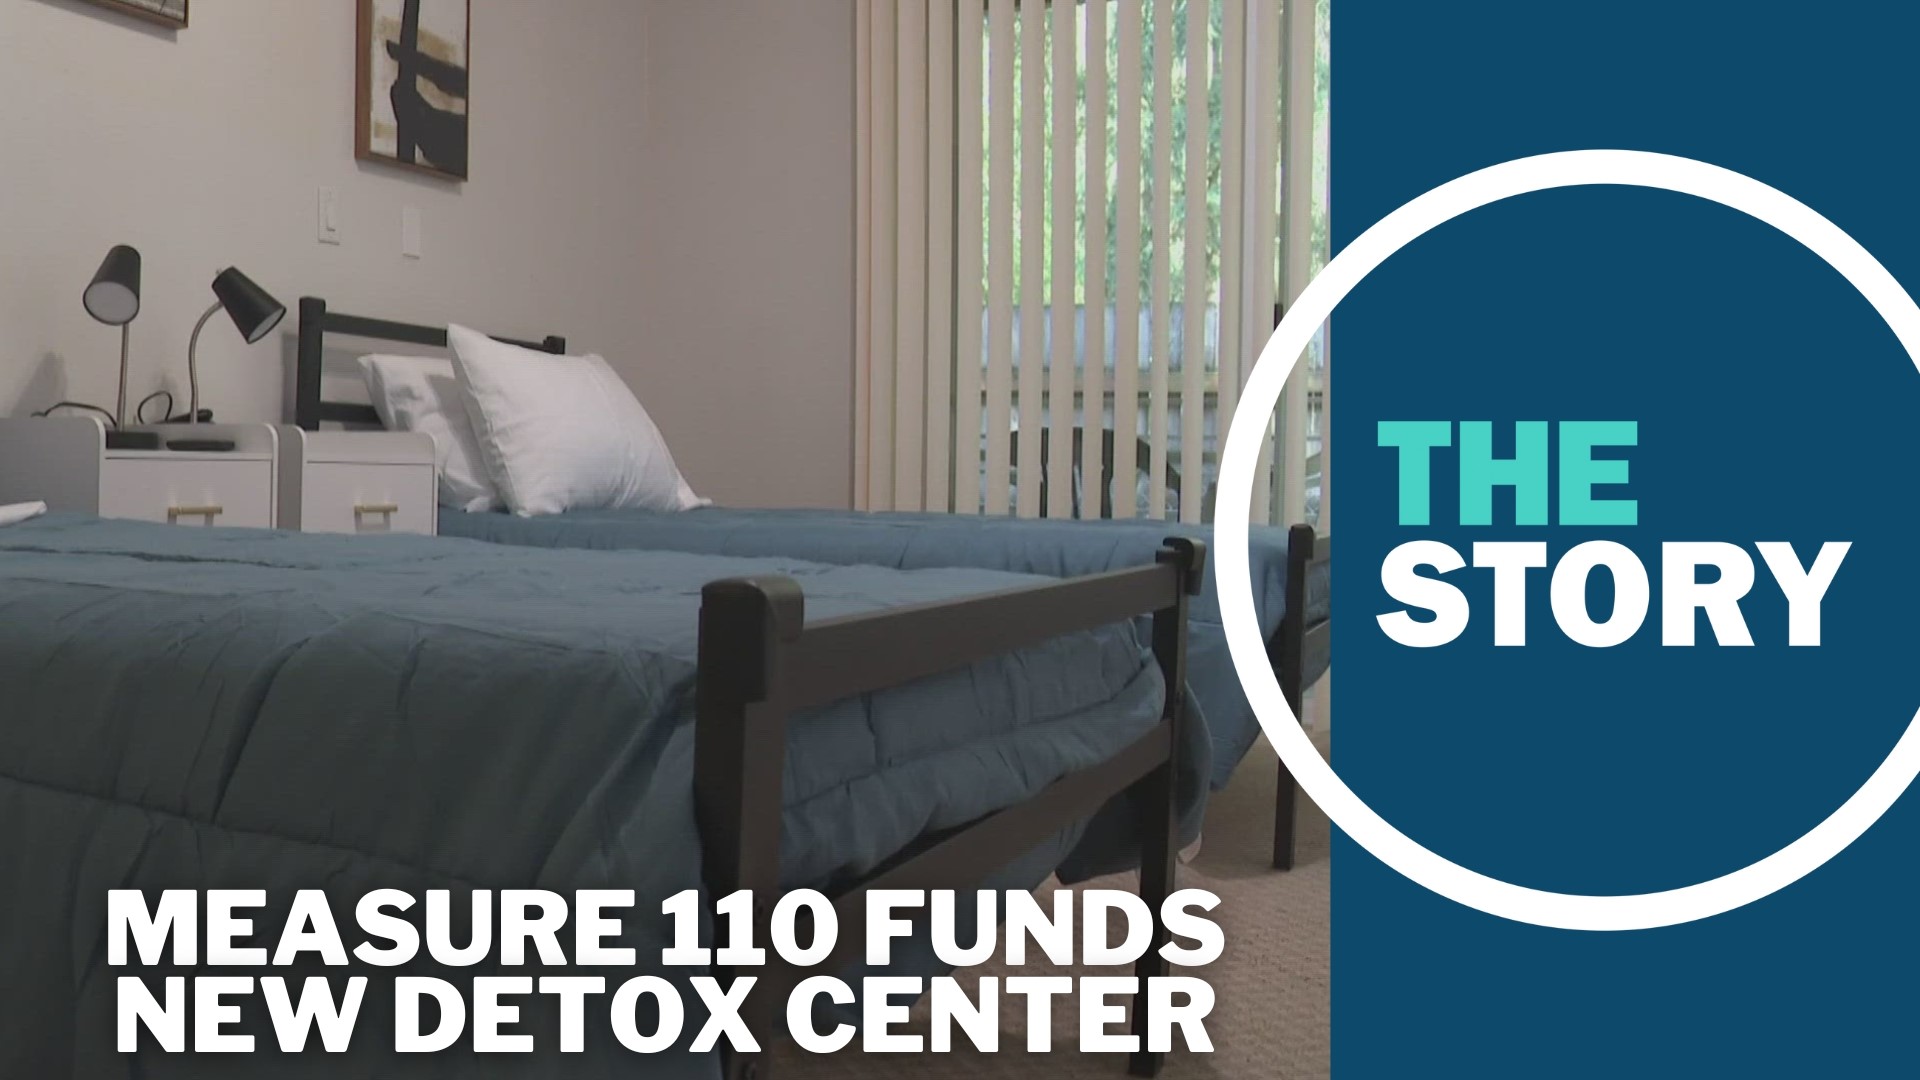 The facility off Southeast Foster Road is the first detox center in the state to be funded through money from Measure 110.